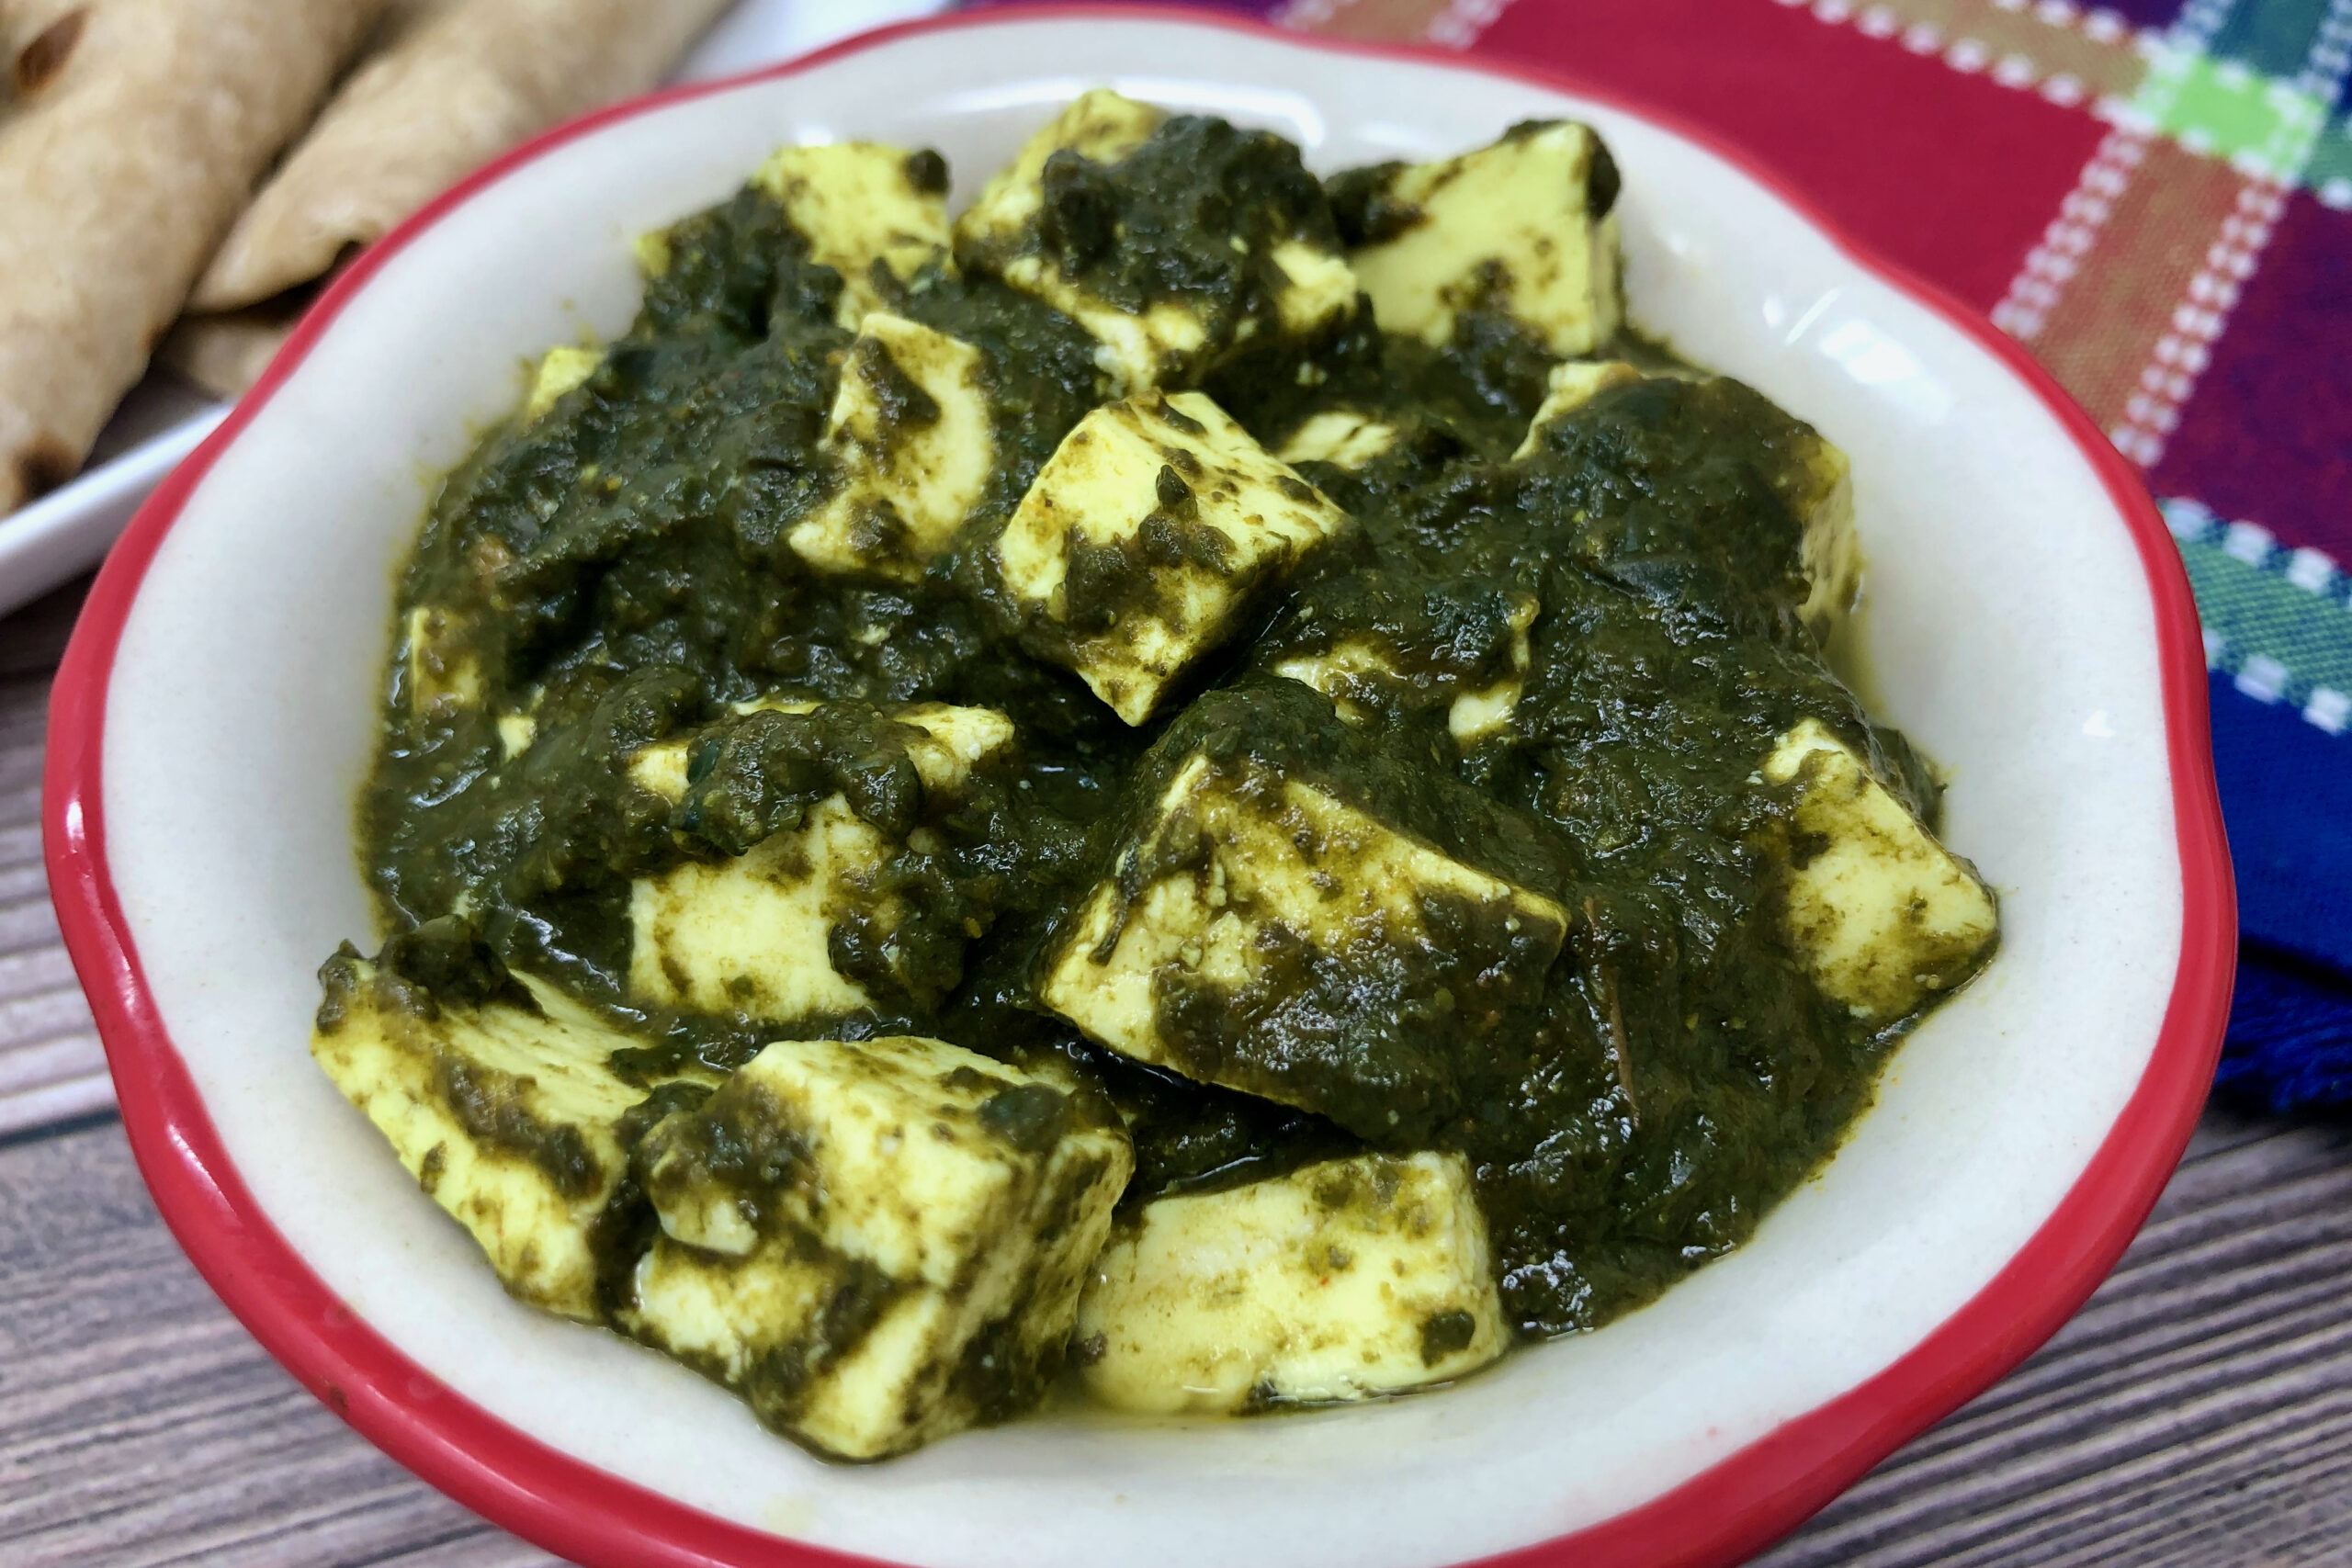 palak paneer in a bowl with roti in background.